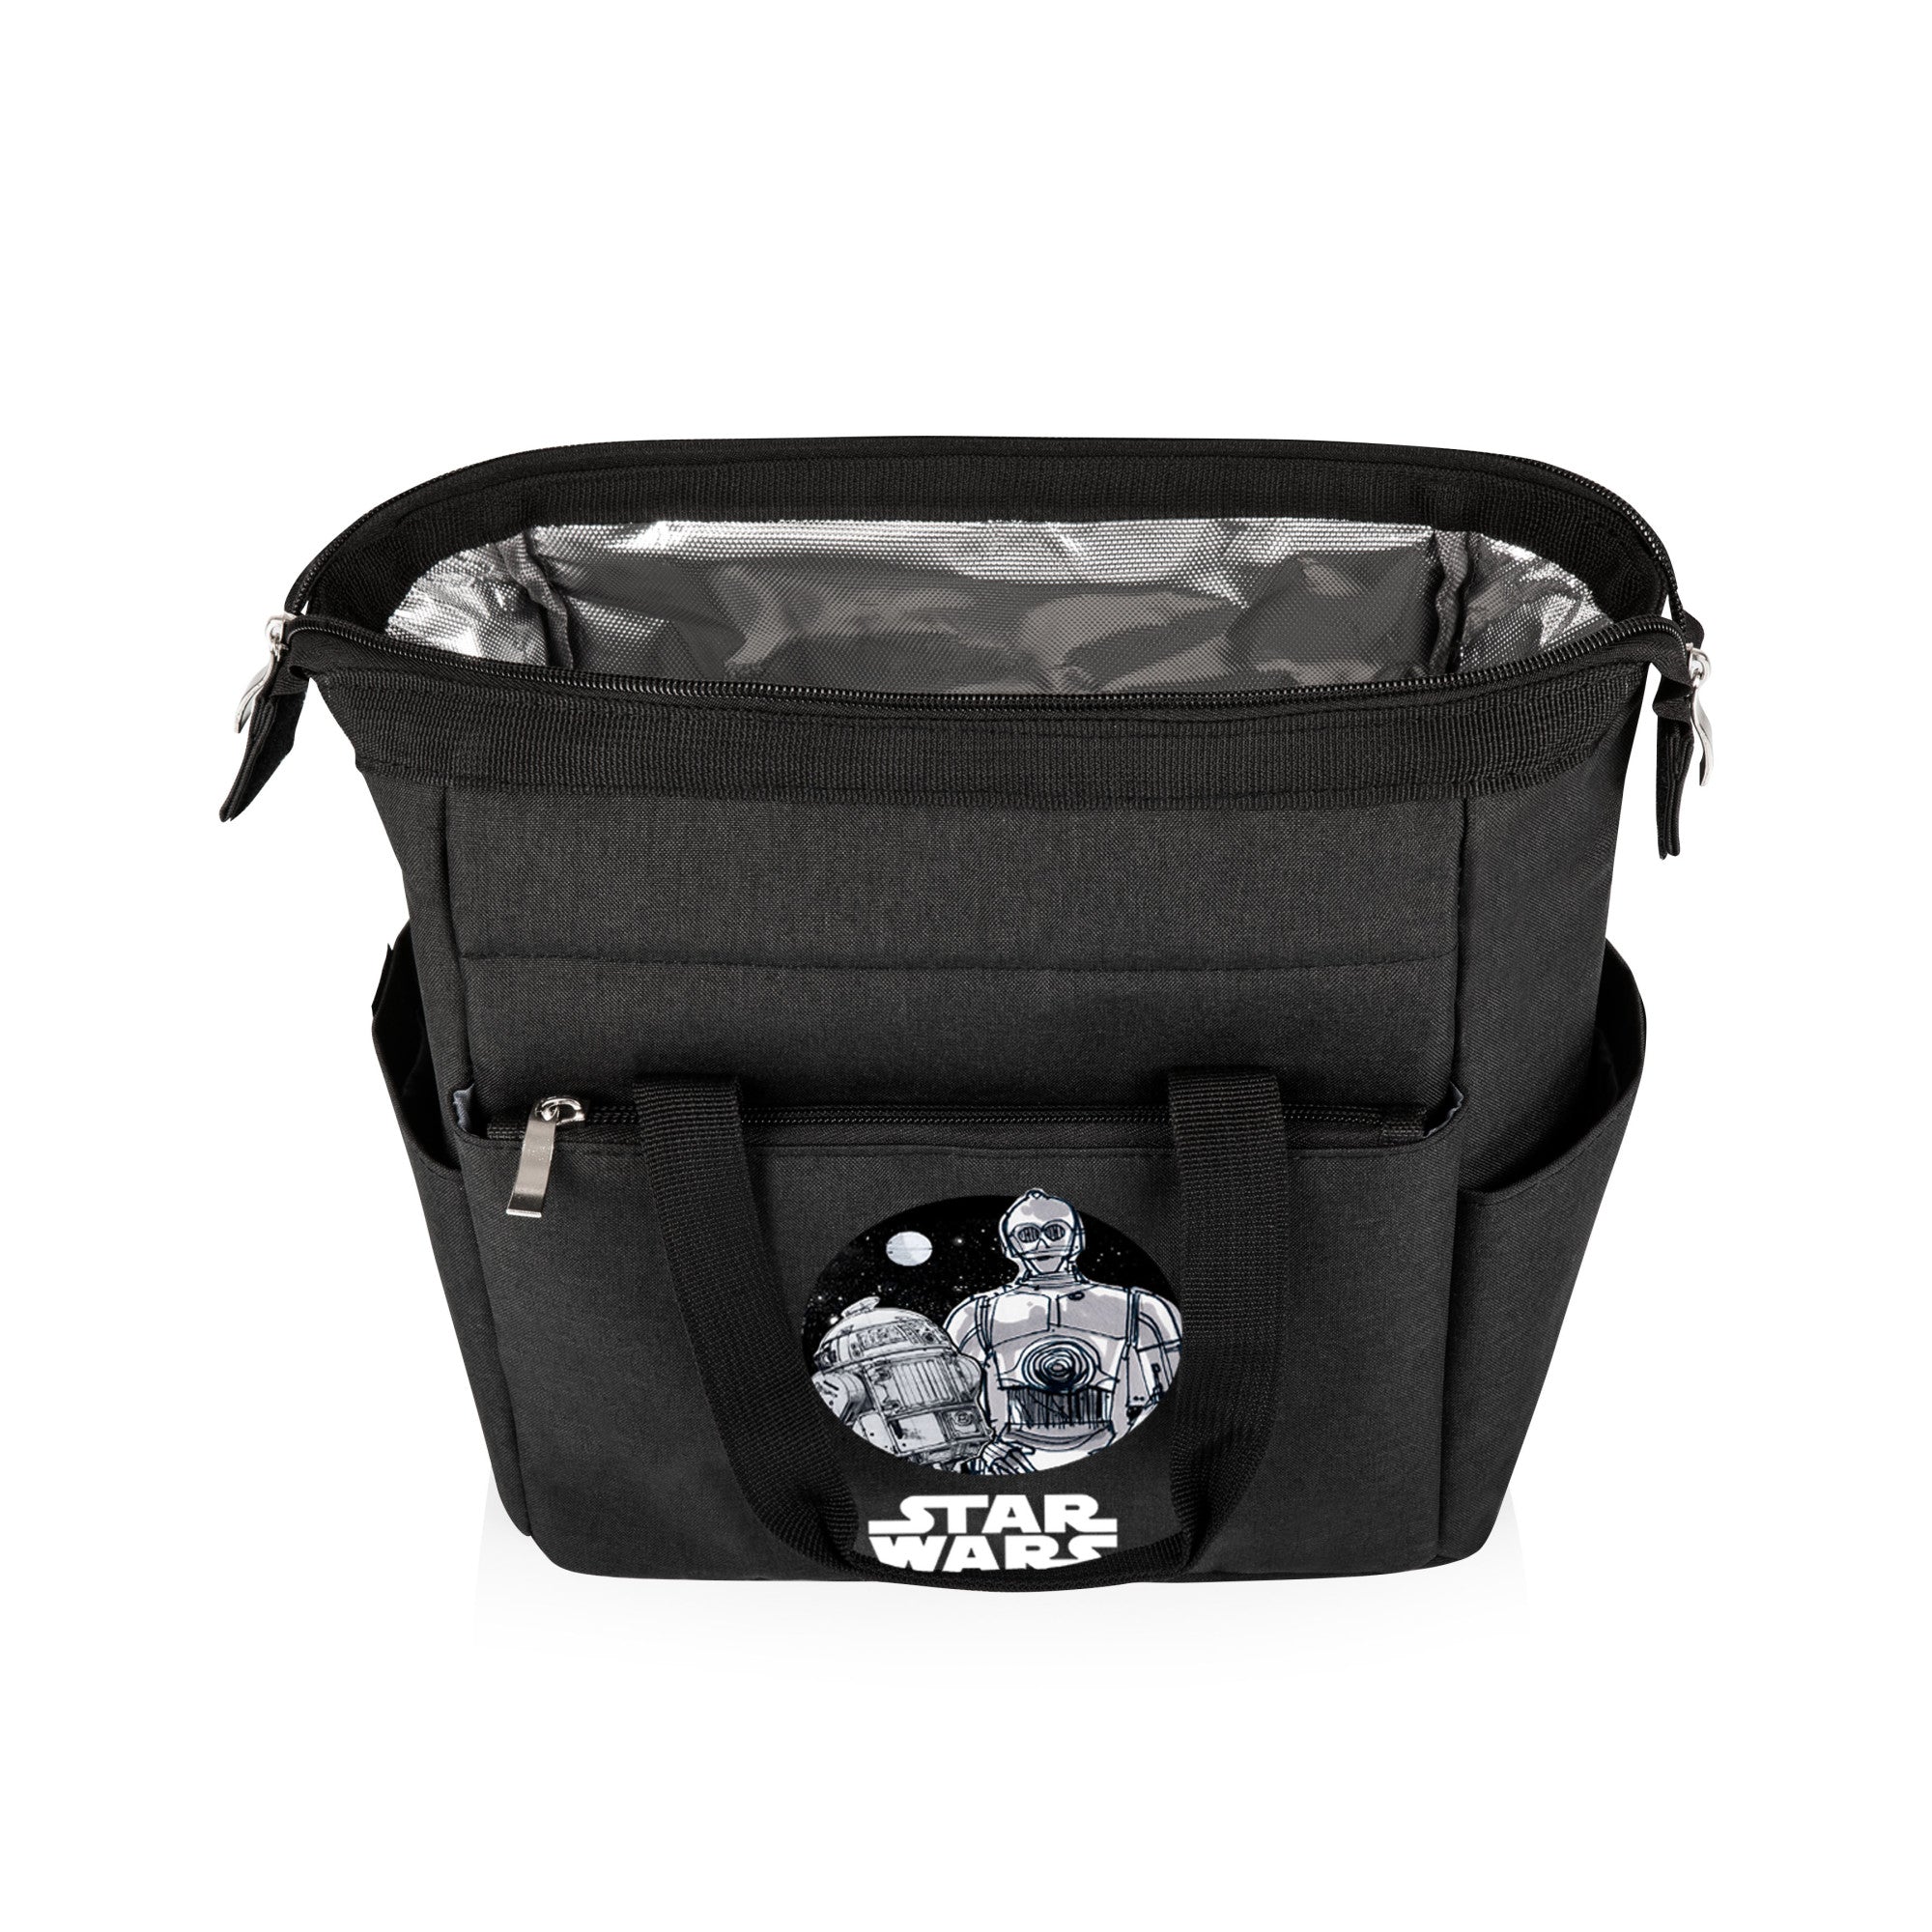 Star Wars Droids - On The Go Lunch Bag Cooler